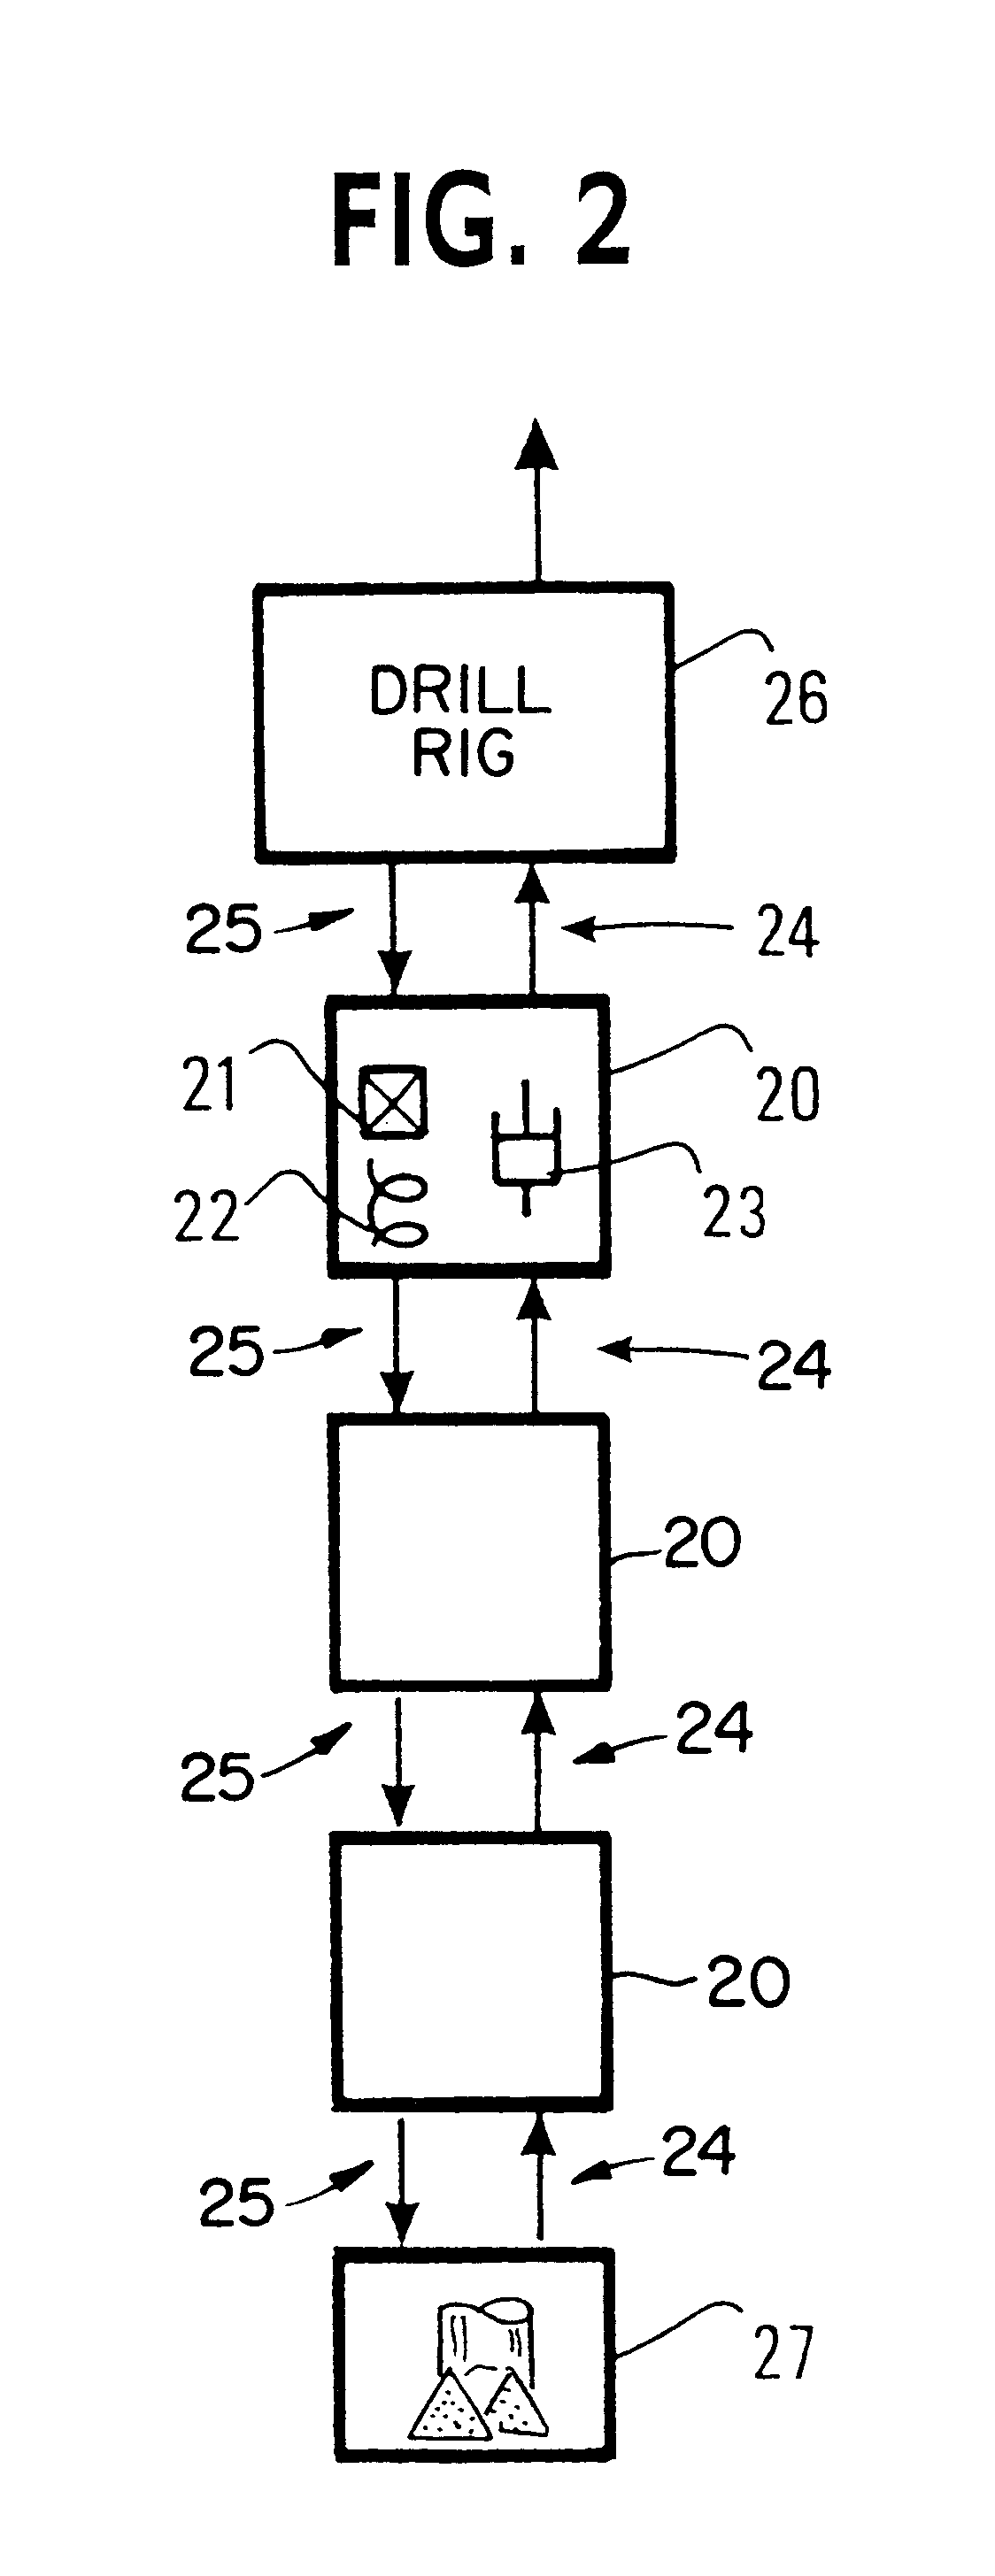 Method and system for detecting the longitudinal displacement of a drill bit